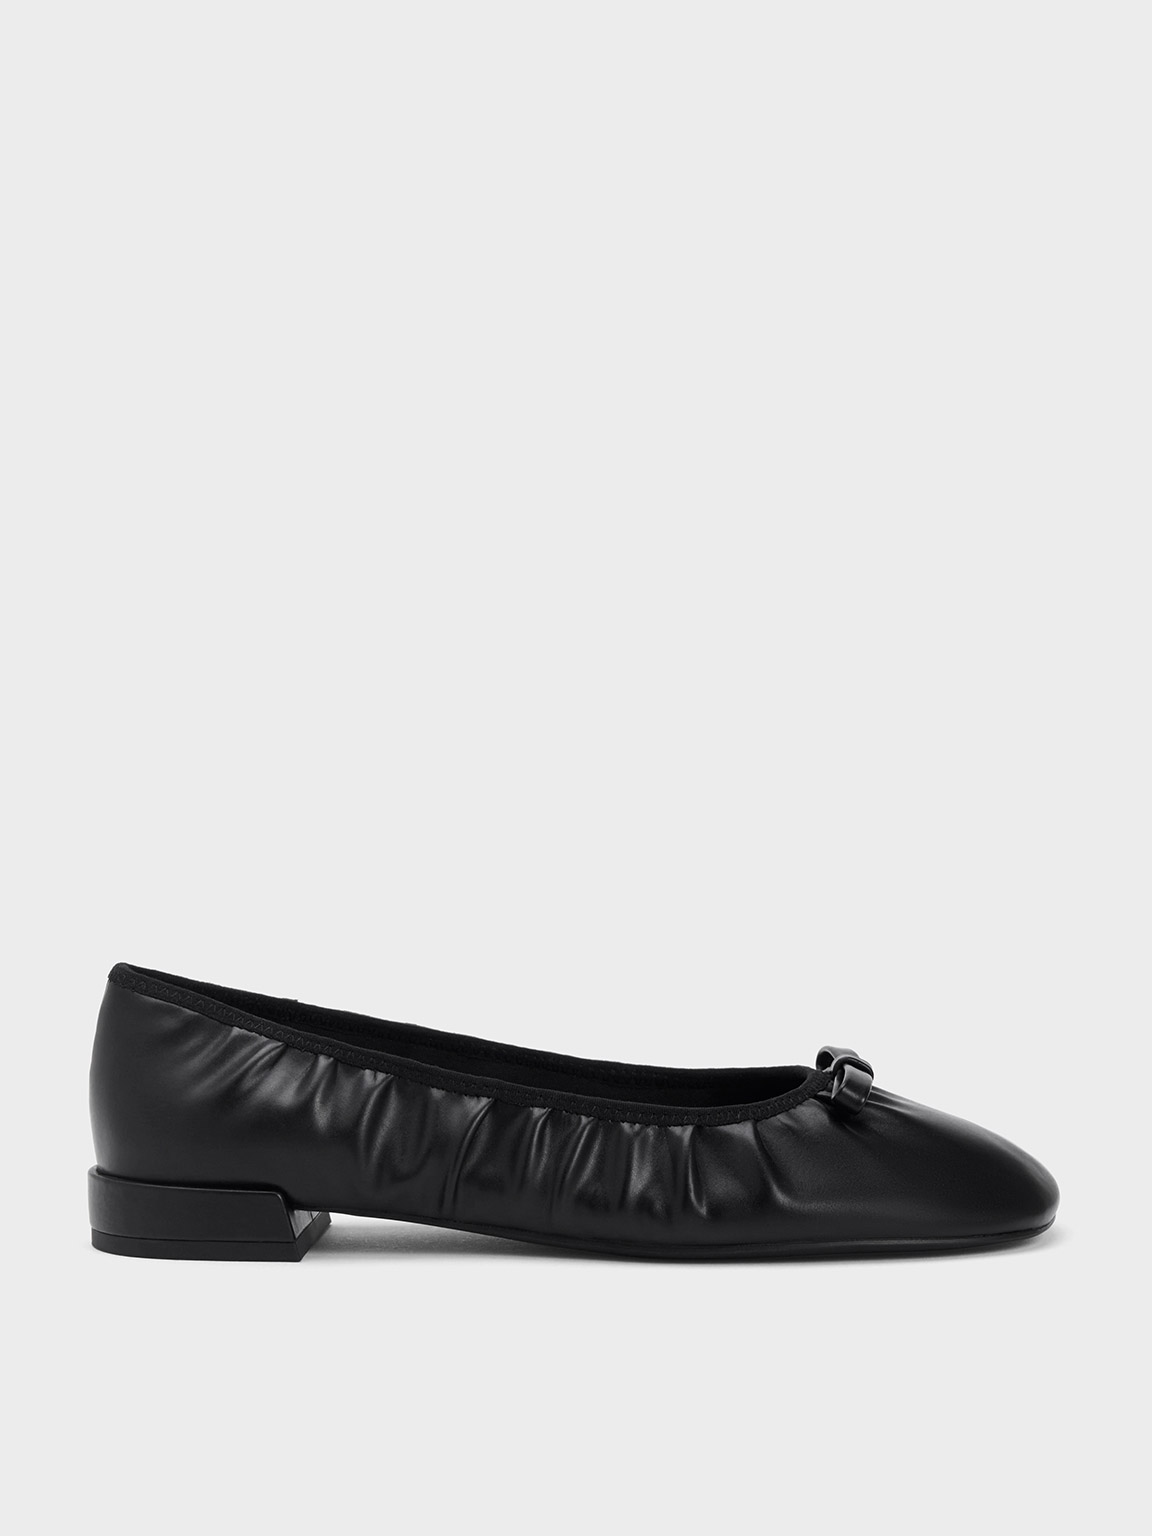 Black Bow Ruched Ballerinas - CHARLES & KEITH ID